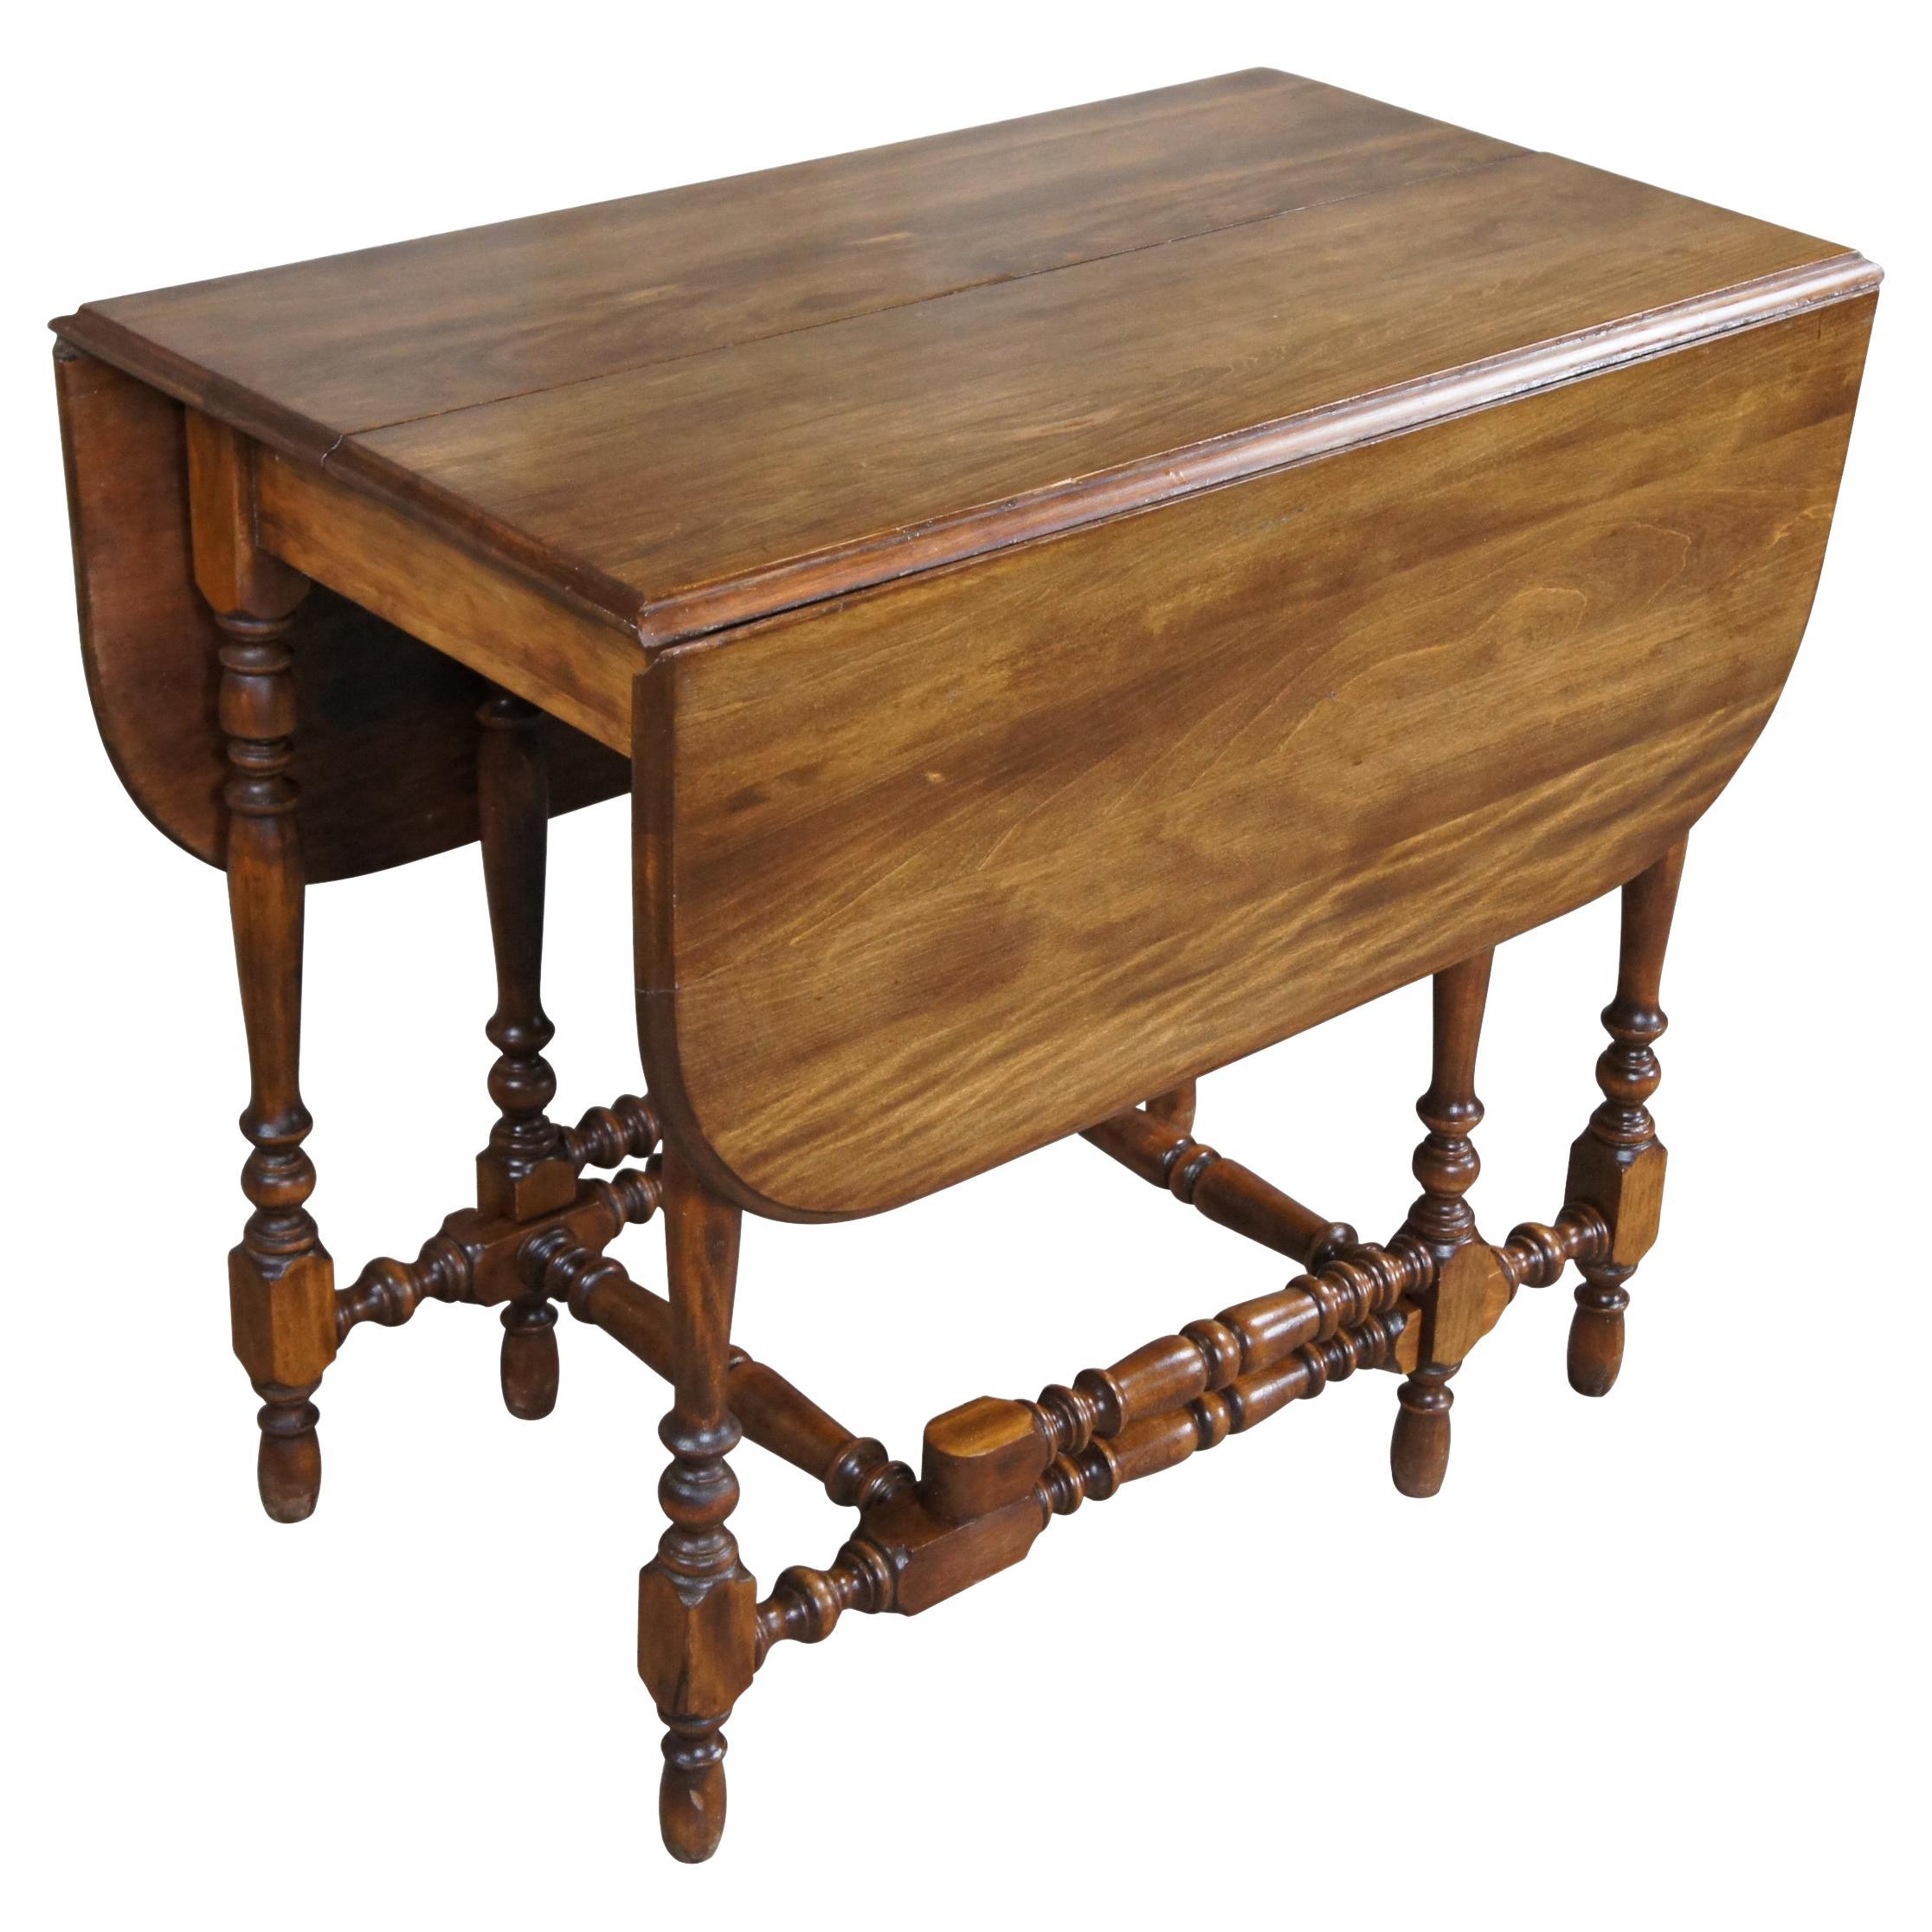 Early 20th century William & Mary style Gateleg extendable breakfast, dining or console table.  Made from maple with turned legs and a unique hidden leaf that folds out once extended.  

20.5